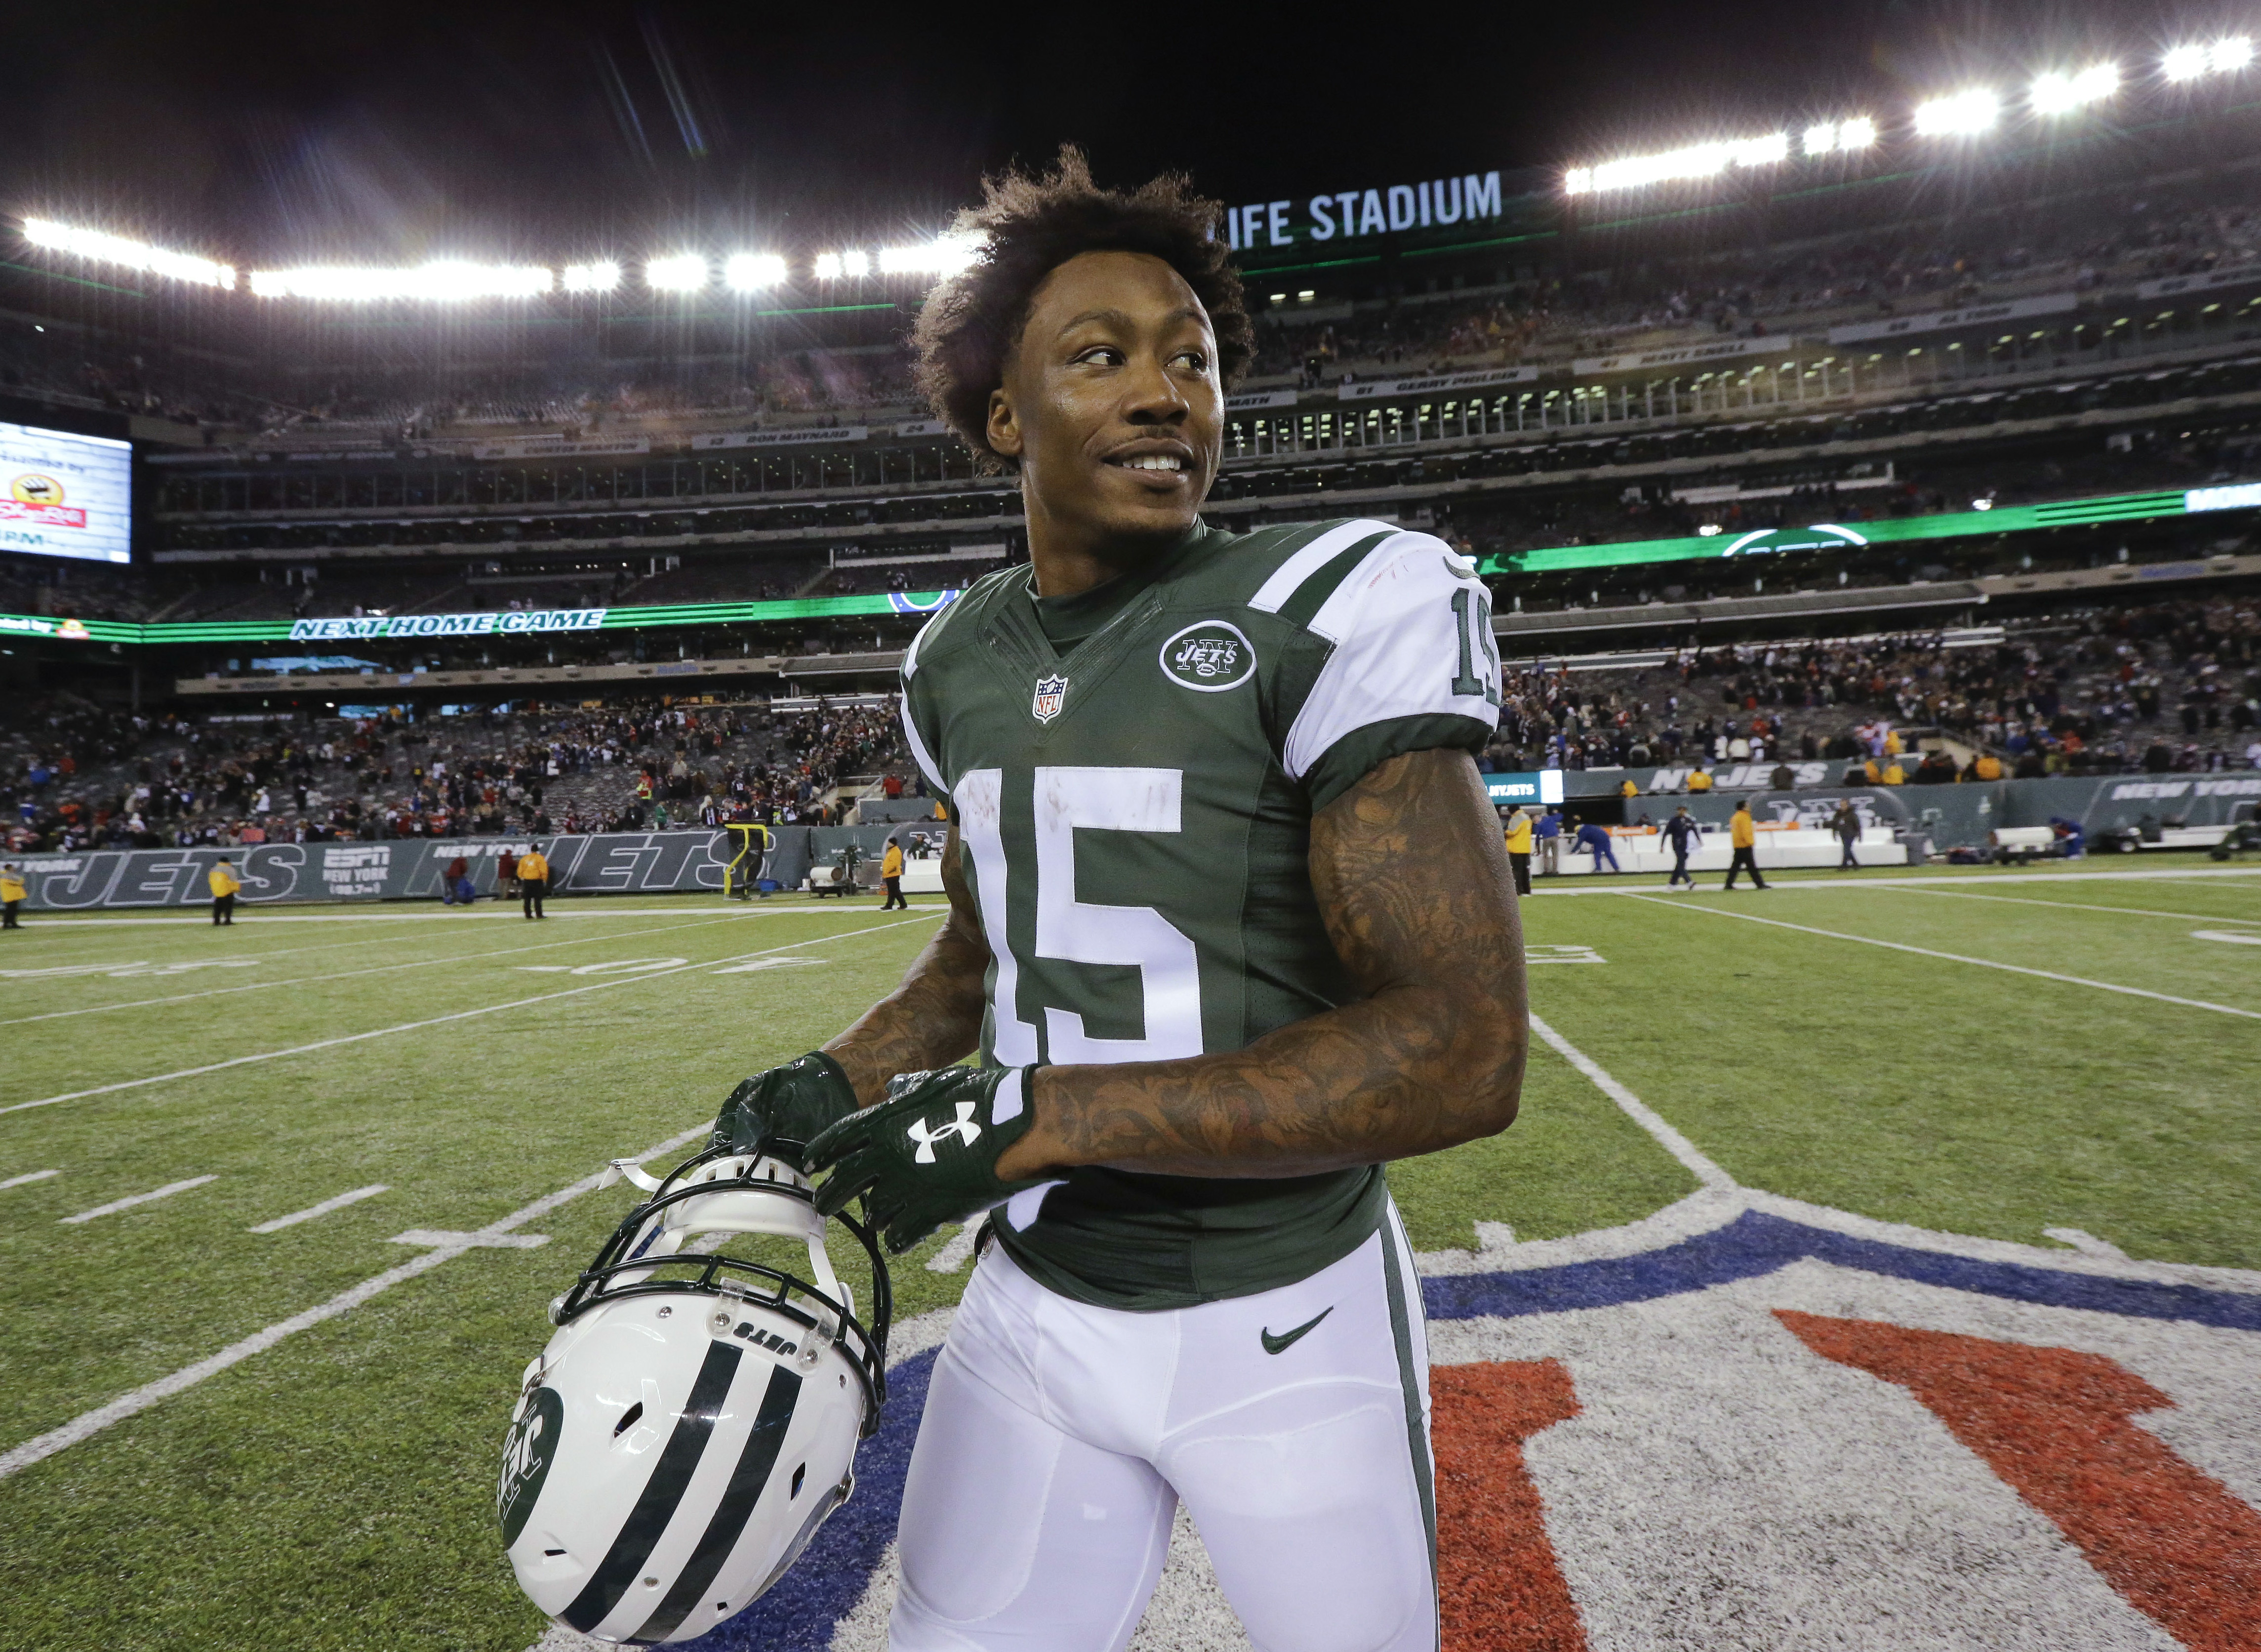 Brandon Marshall has quite the NFL jersey collection